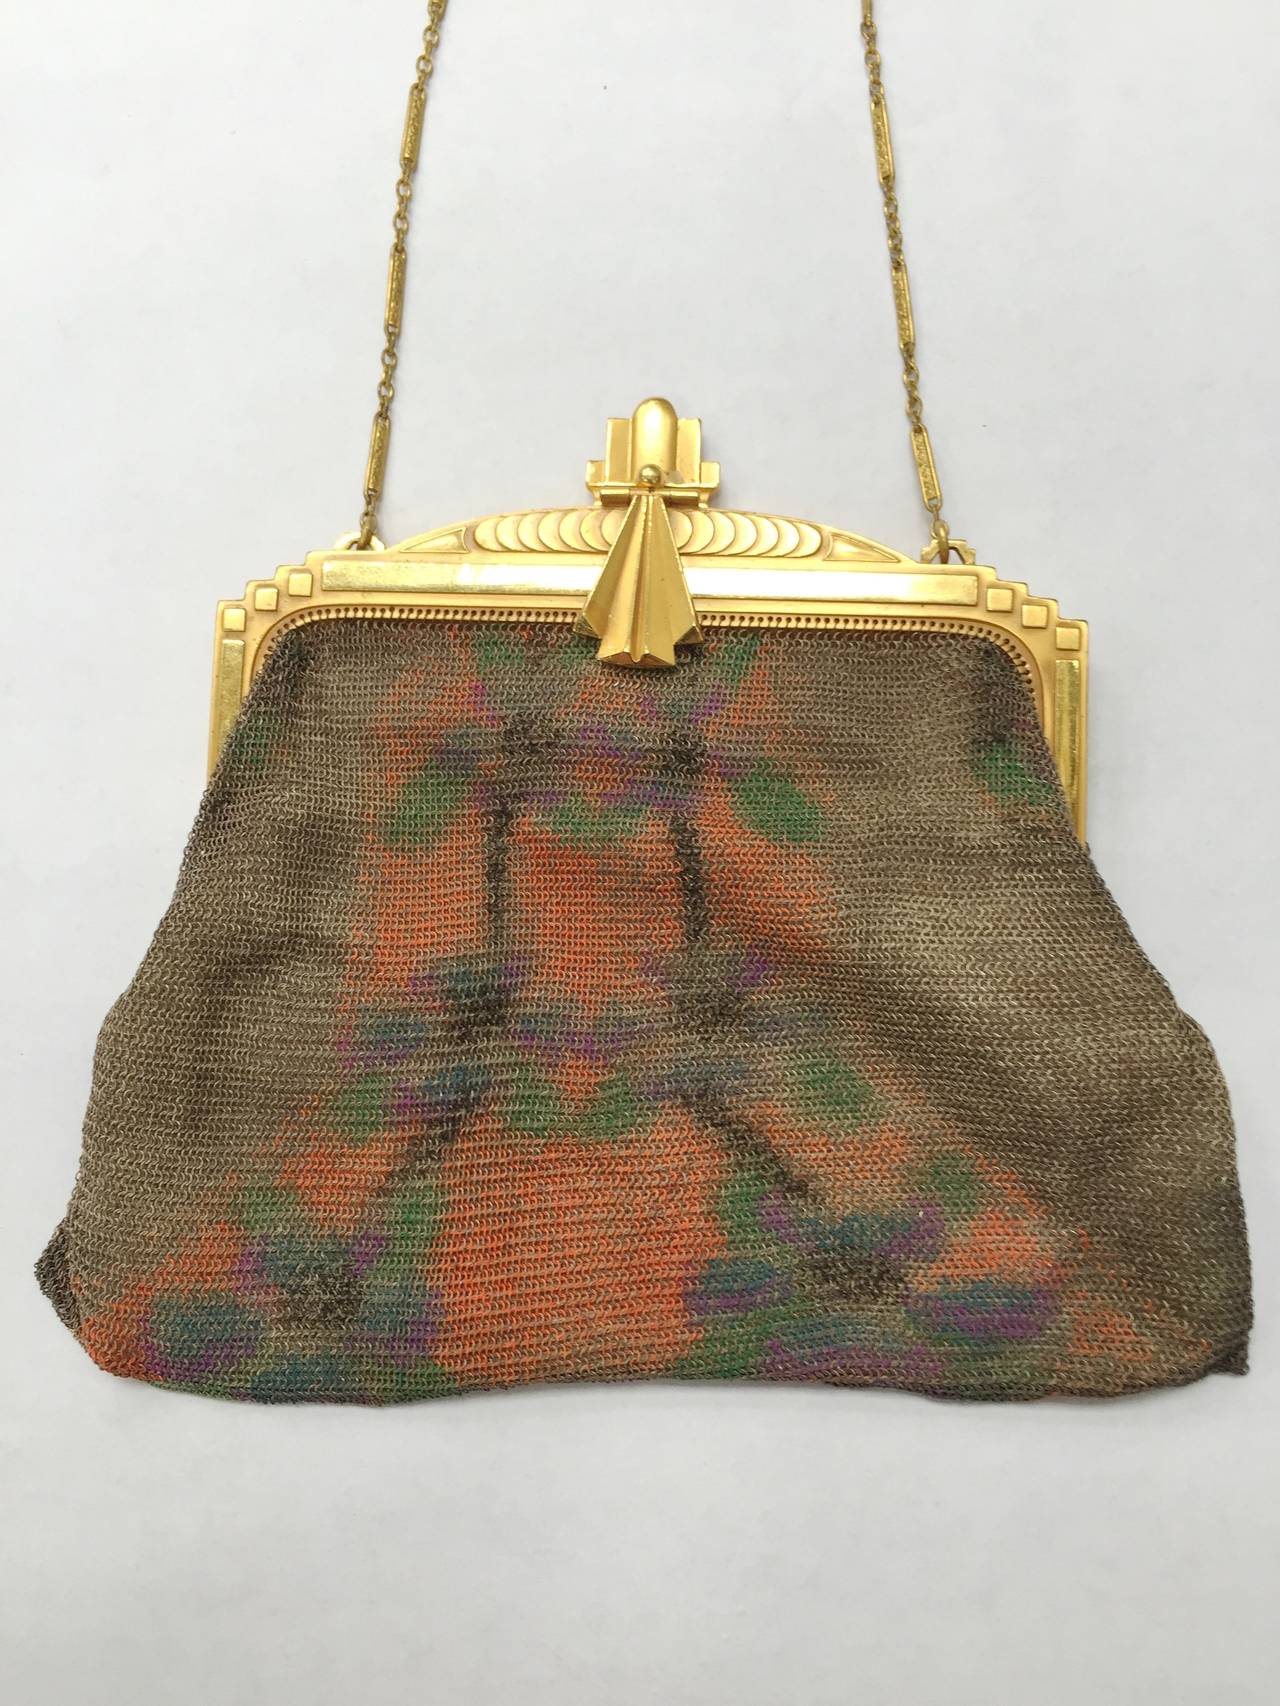 Whiting & Davis 1920s Paul Poiret Art Deco Flapper mesh purse with flower pattern. In 1929 Whiting & Davis produced a large collection of mesh bags designed in conjunction with French fashion designer Paul Poiret these became knows as the 